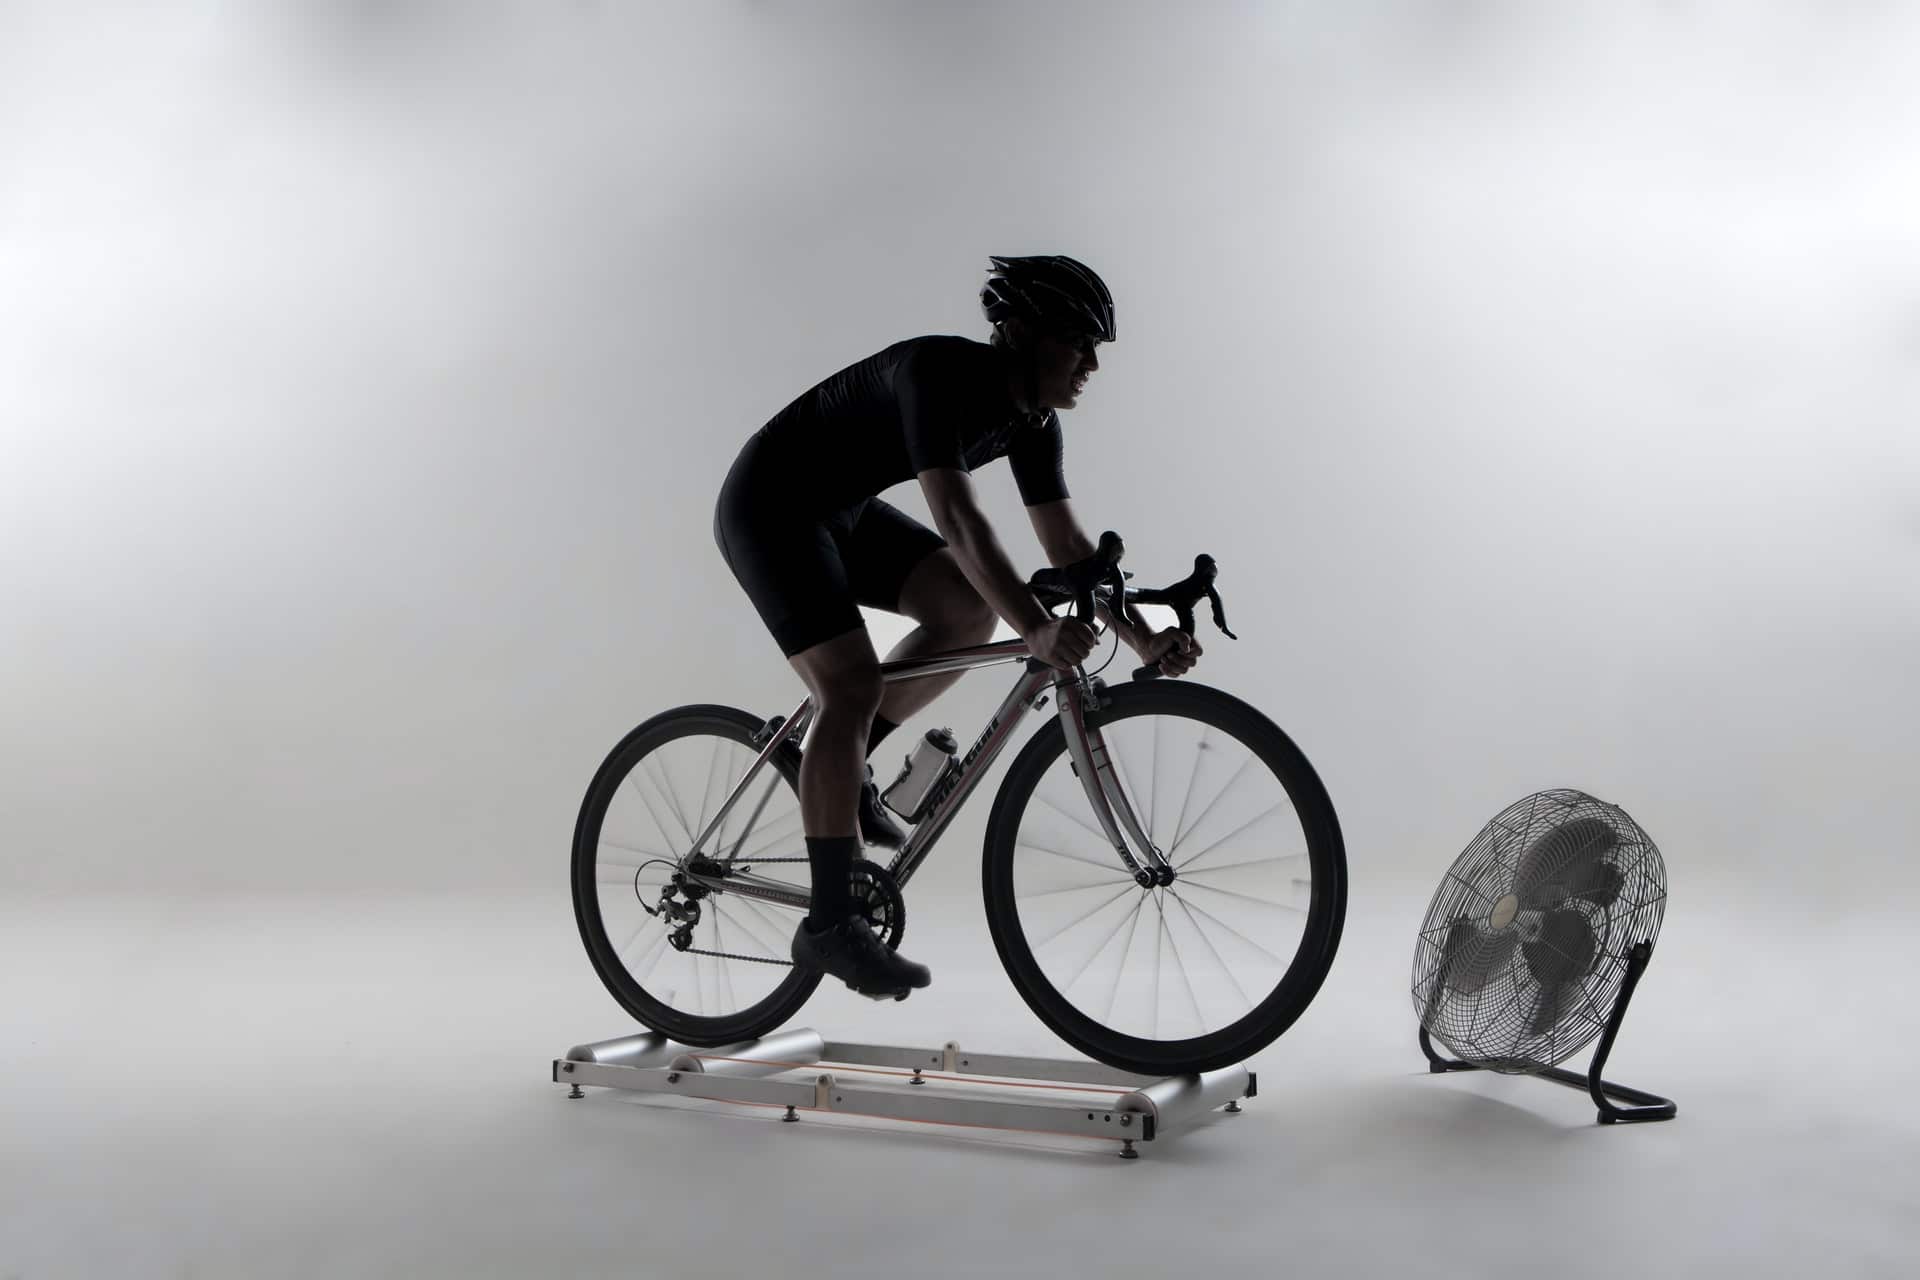 cyclist riding on the stationary indoor bike stand